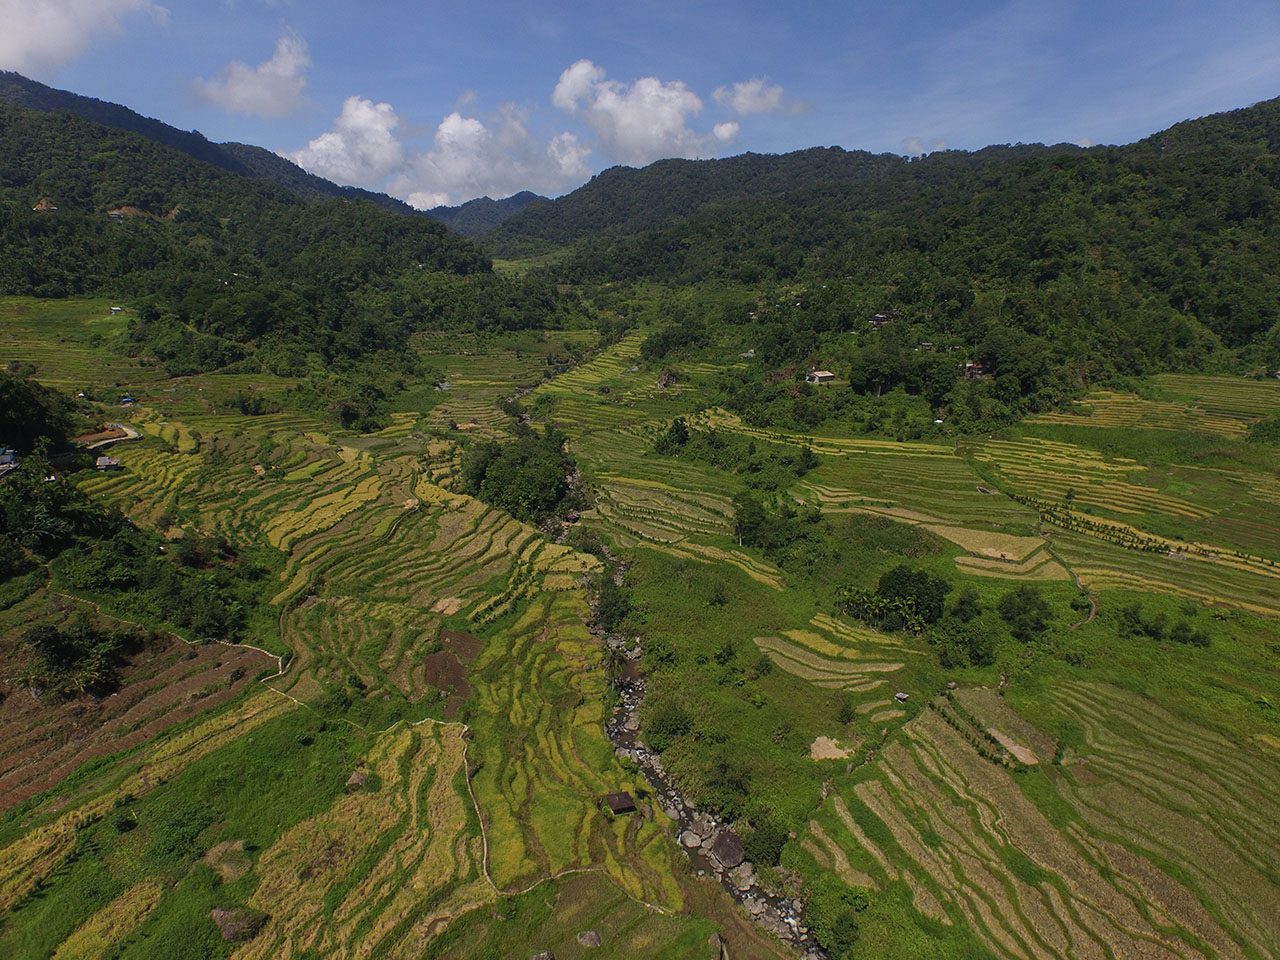 Demystifying the age of the Ifugao Rice Terraces to decolonize history